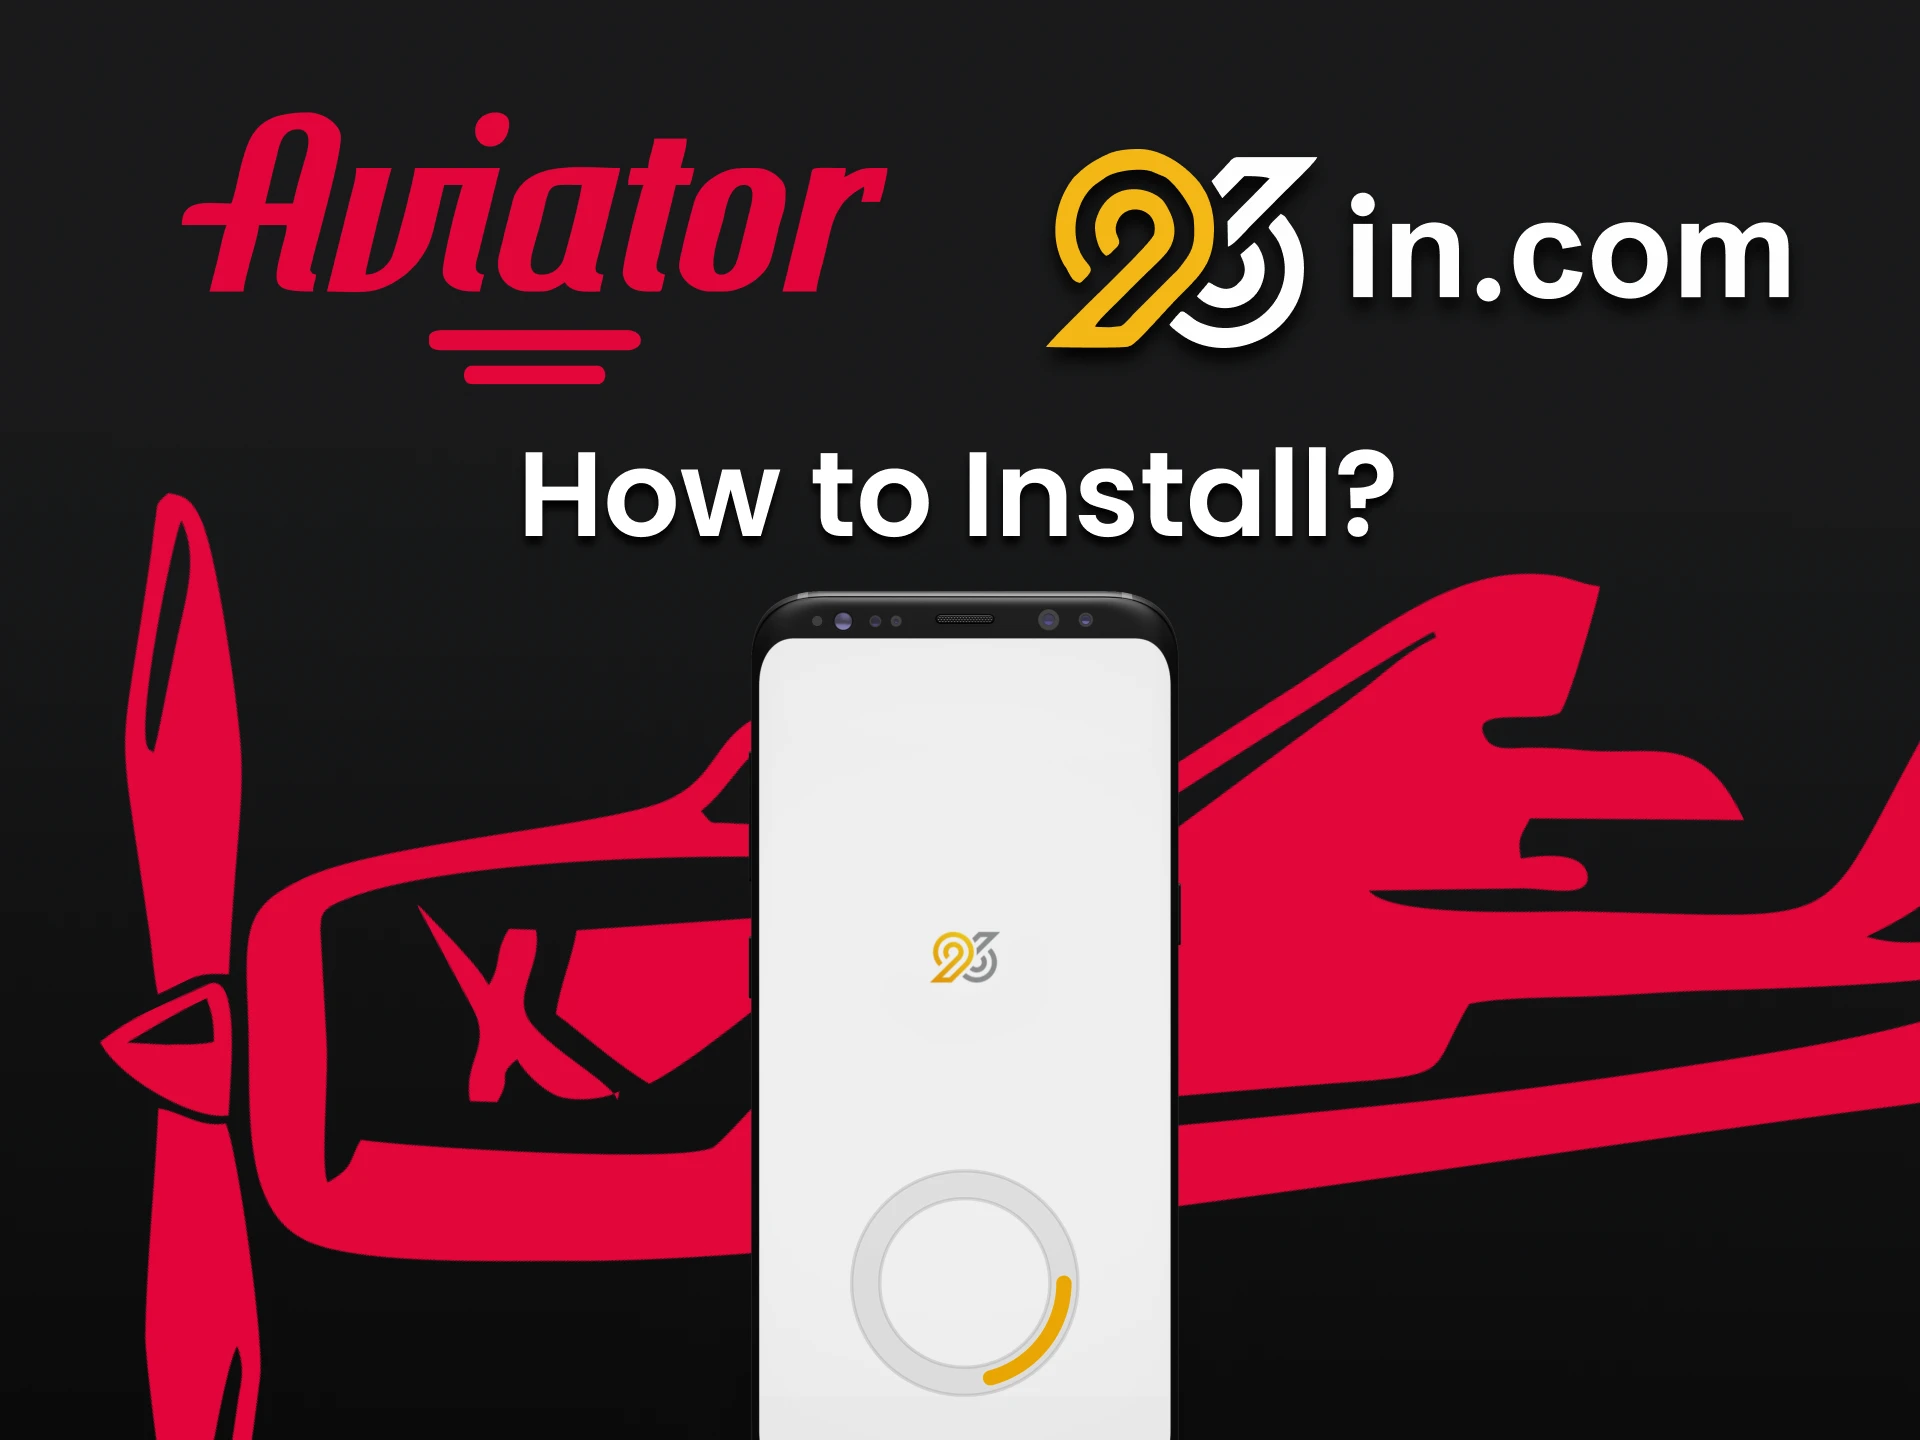 Learn how to install the 96in app to play Aviator.